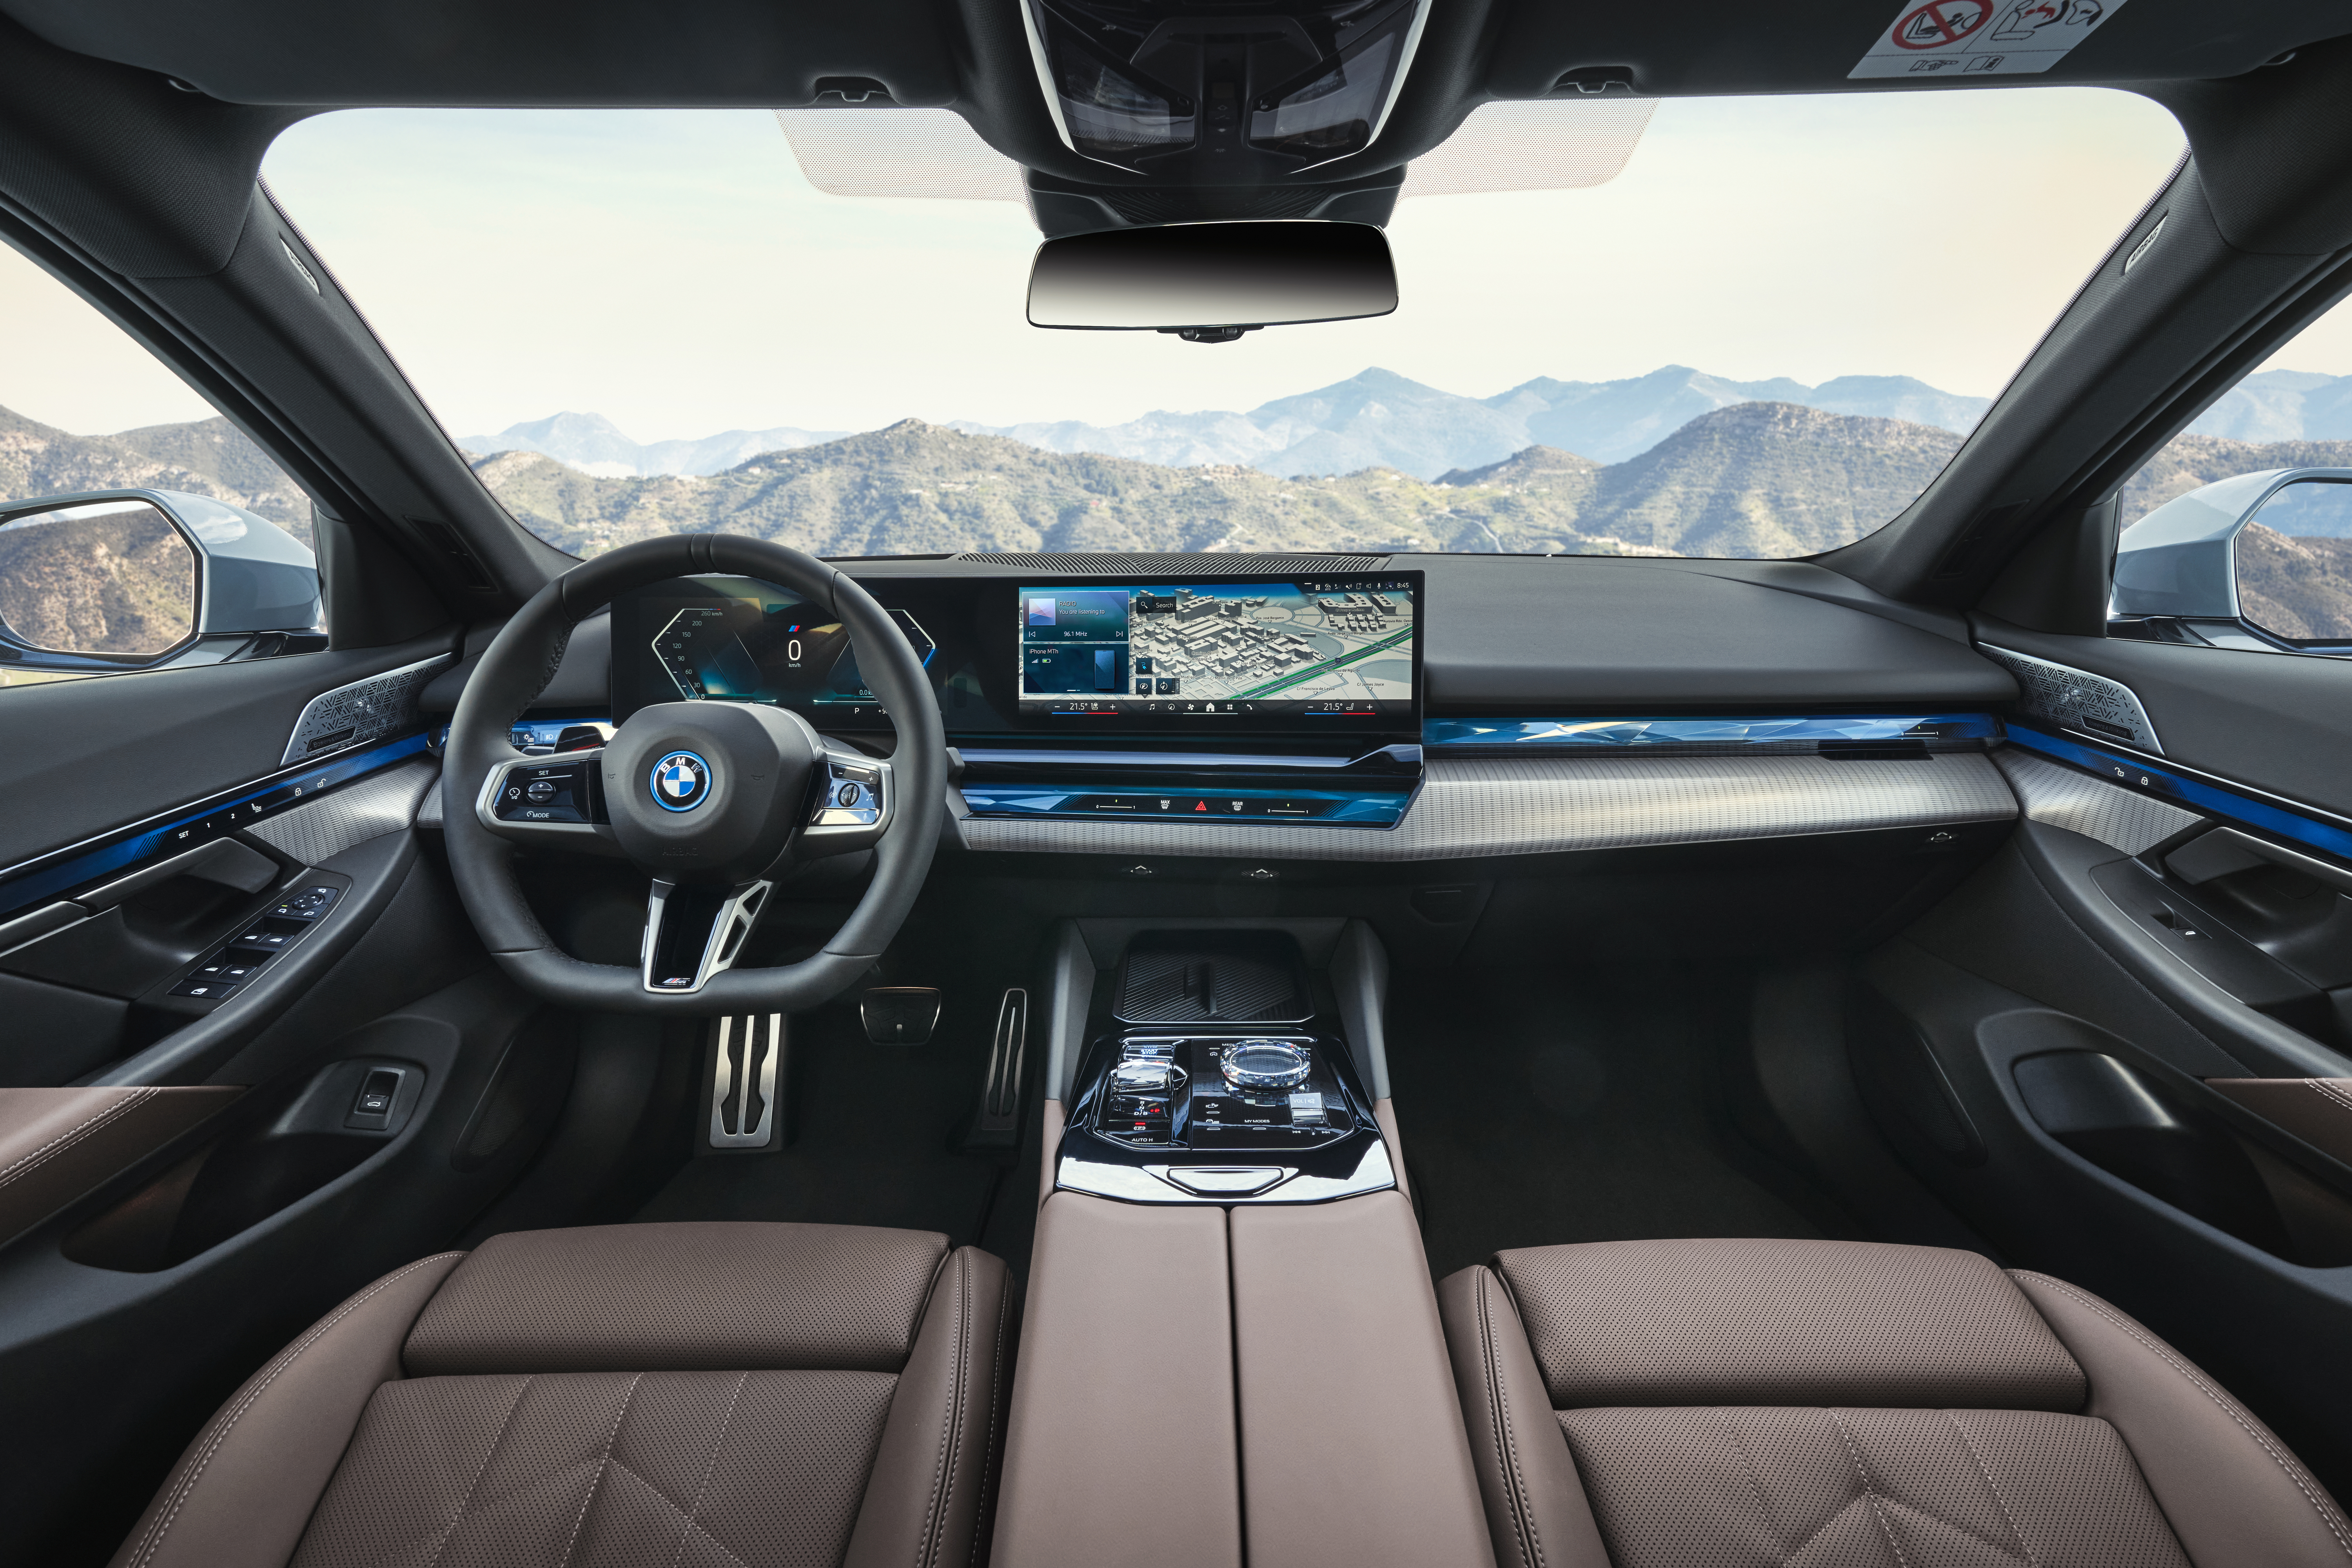 Inside, the BMW 5 Series is luxurious and comfortable.